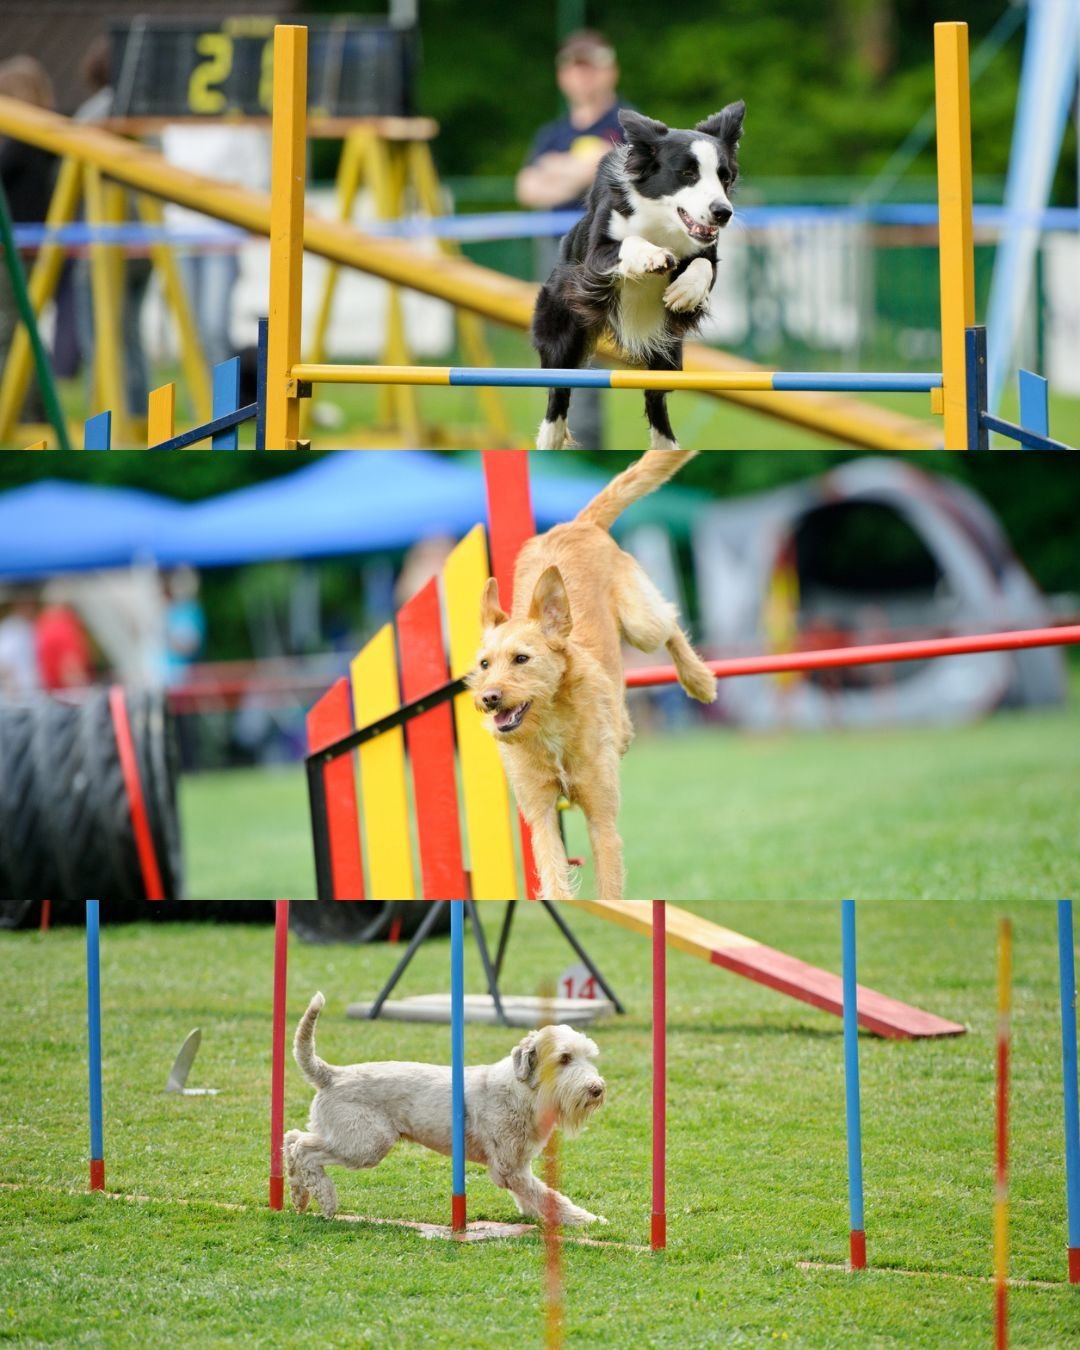 DASH Dog Agility Shows Hampshire, have 4 arenas of competitions on both Saturday and Sunday at this years Dogs Day Out🐾

Over 100 dogs of all different shapes and sizes will be taking part and you can watch them all from the ringside! 😍

Tiny Chihu